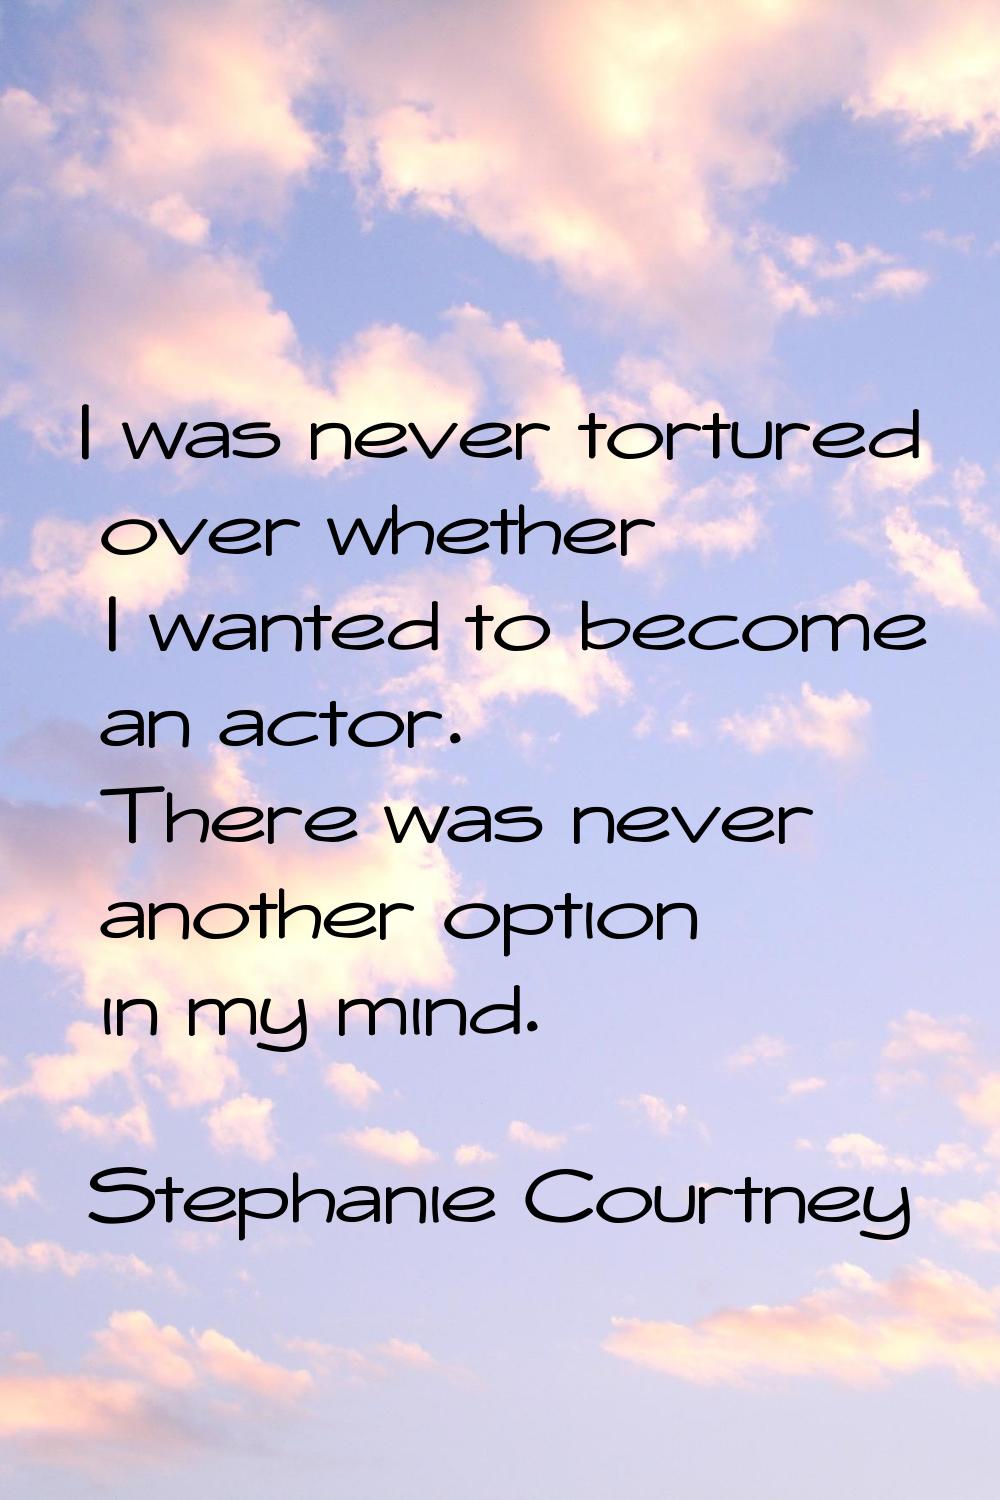 I was never tortured over whether I wanted to become an actor. There was never another option in my